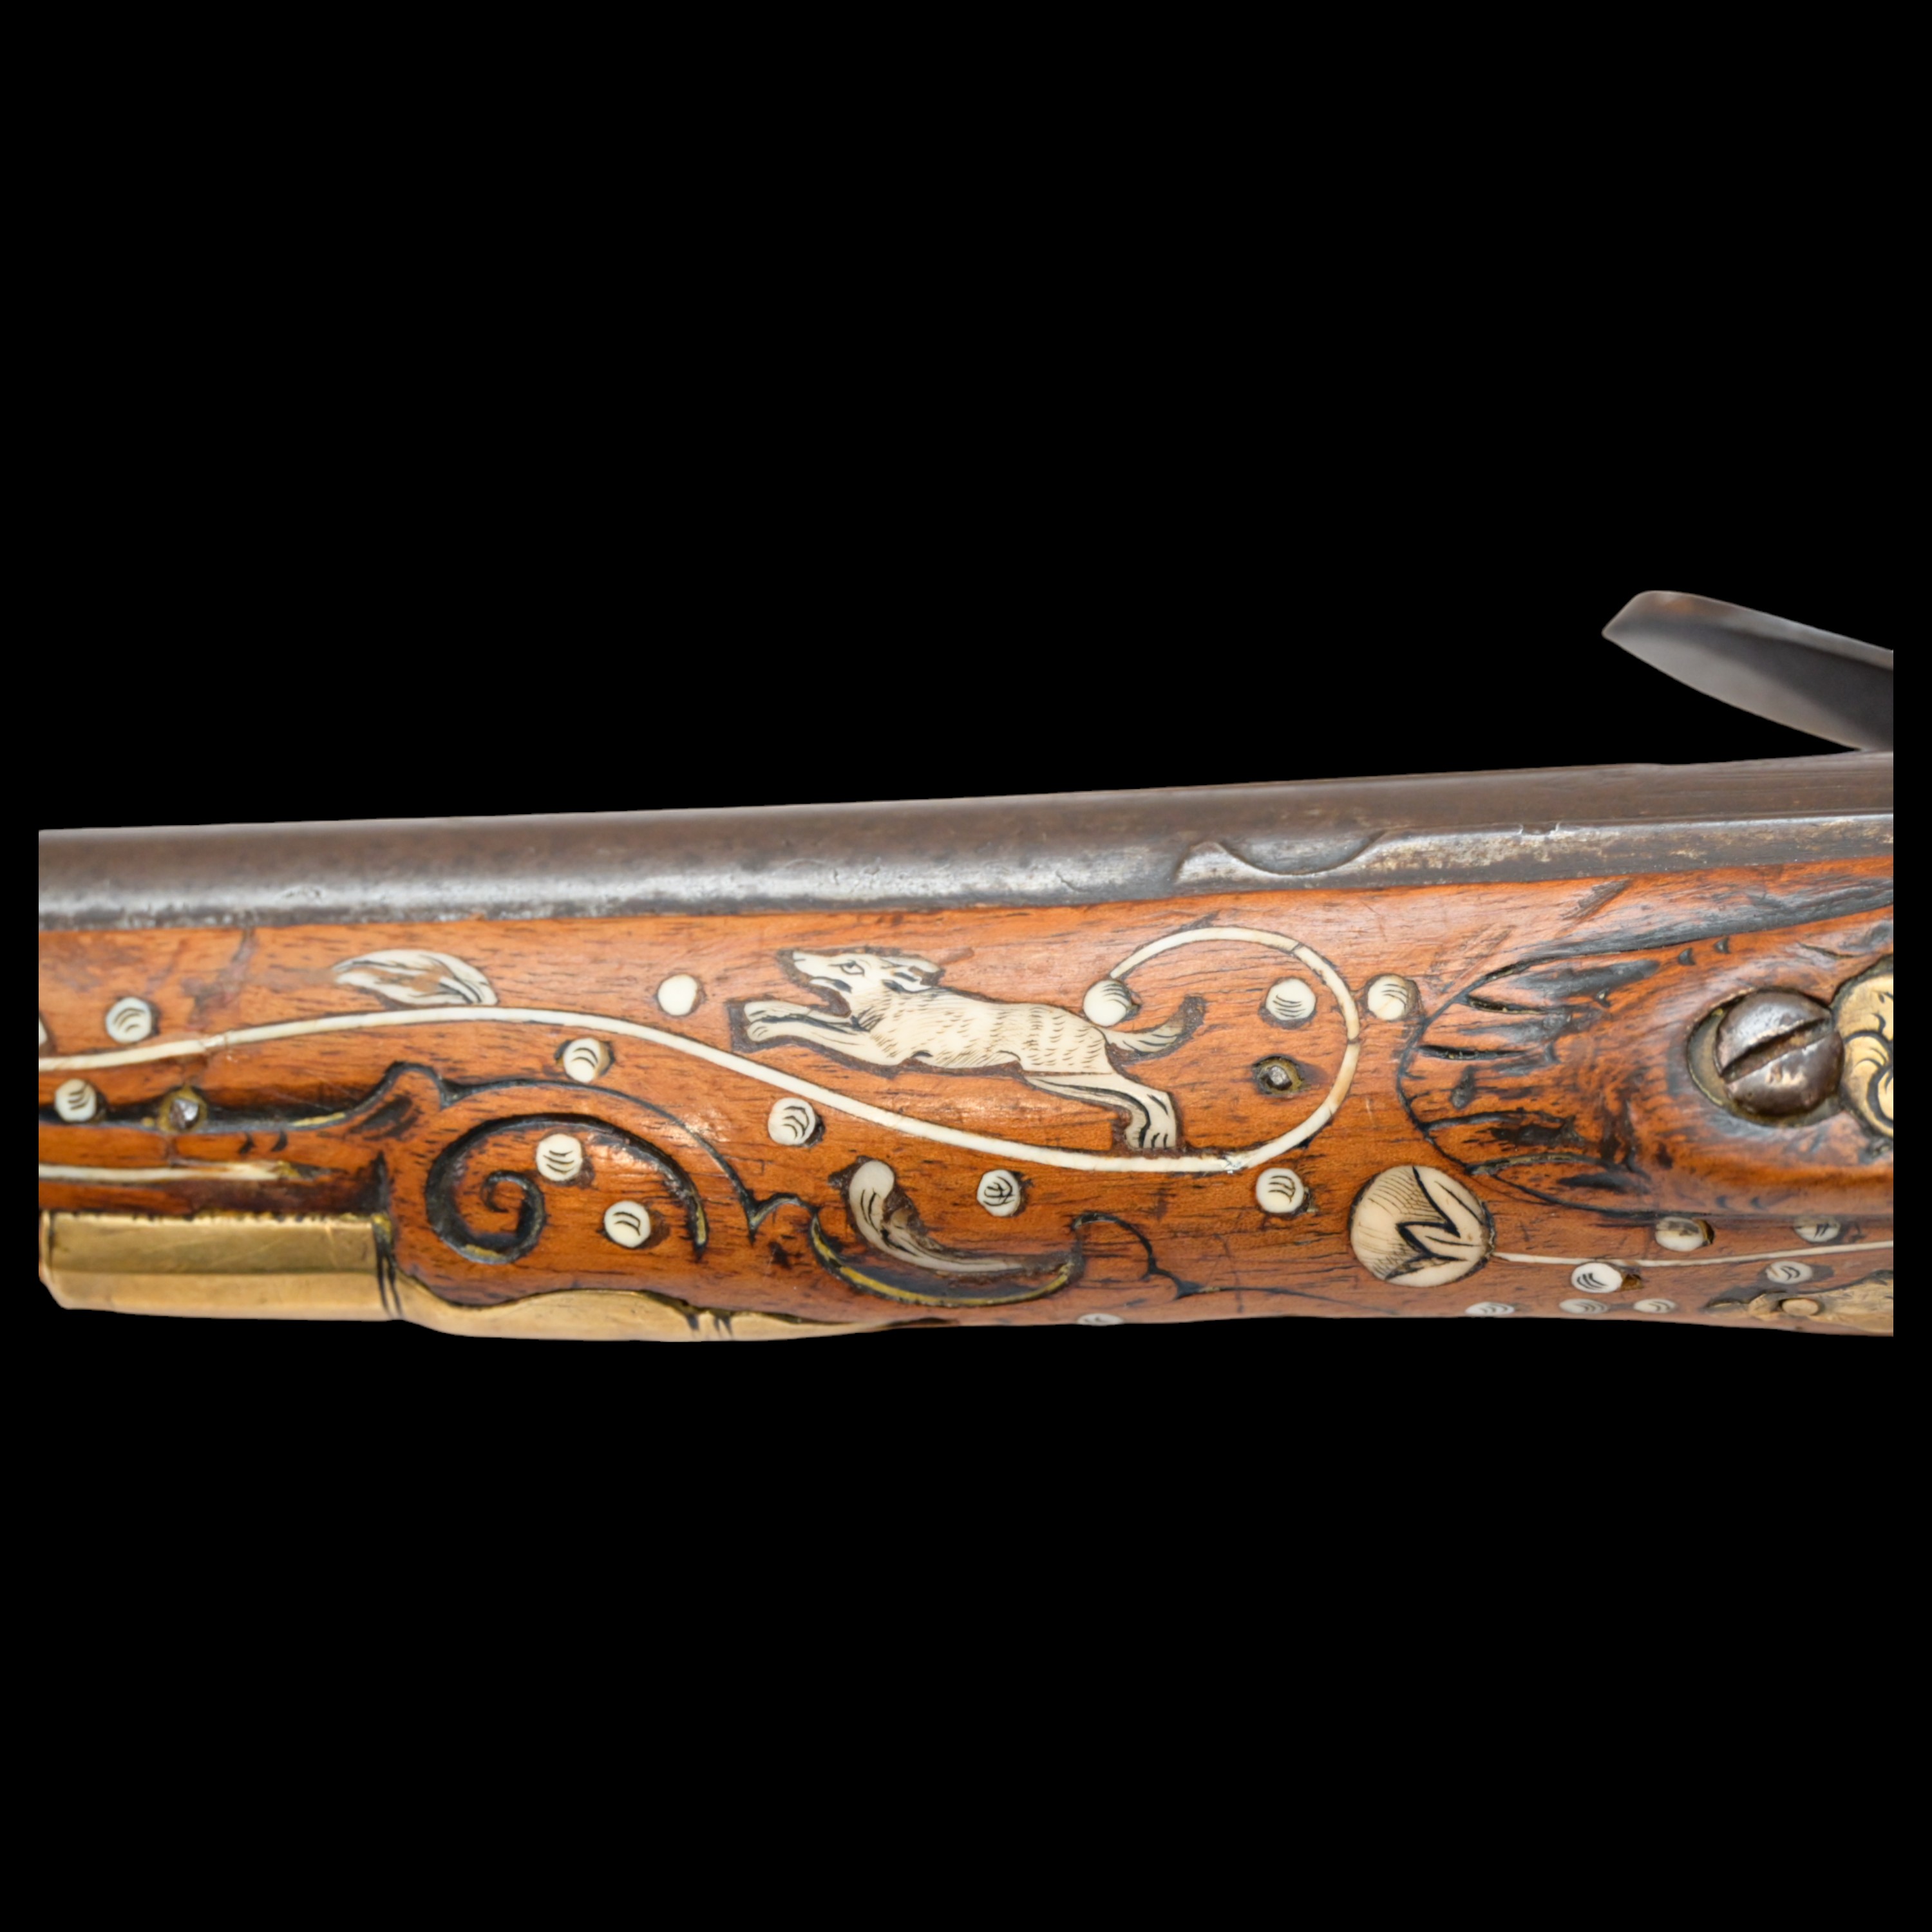 Rare, Richly decorated with inlay, flintlock pistol, Germany, last quarter of the 17th century. - Image 6 of 12